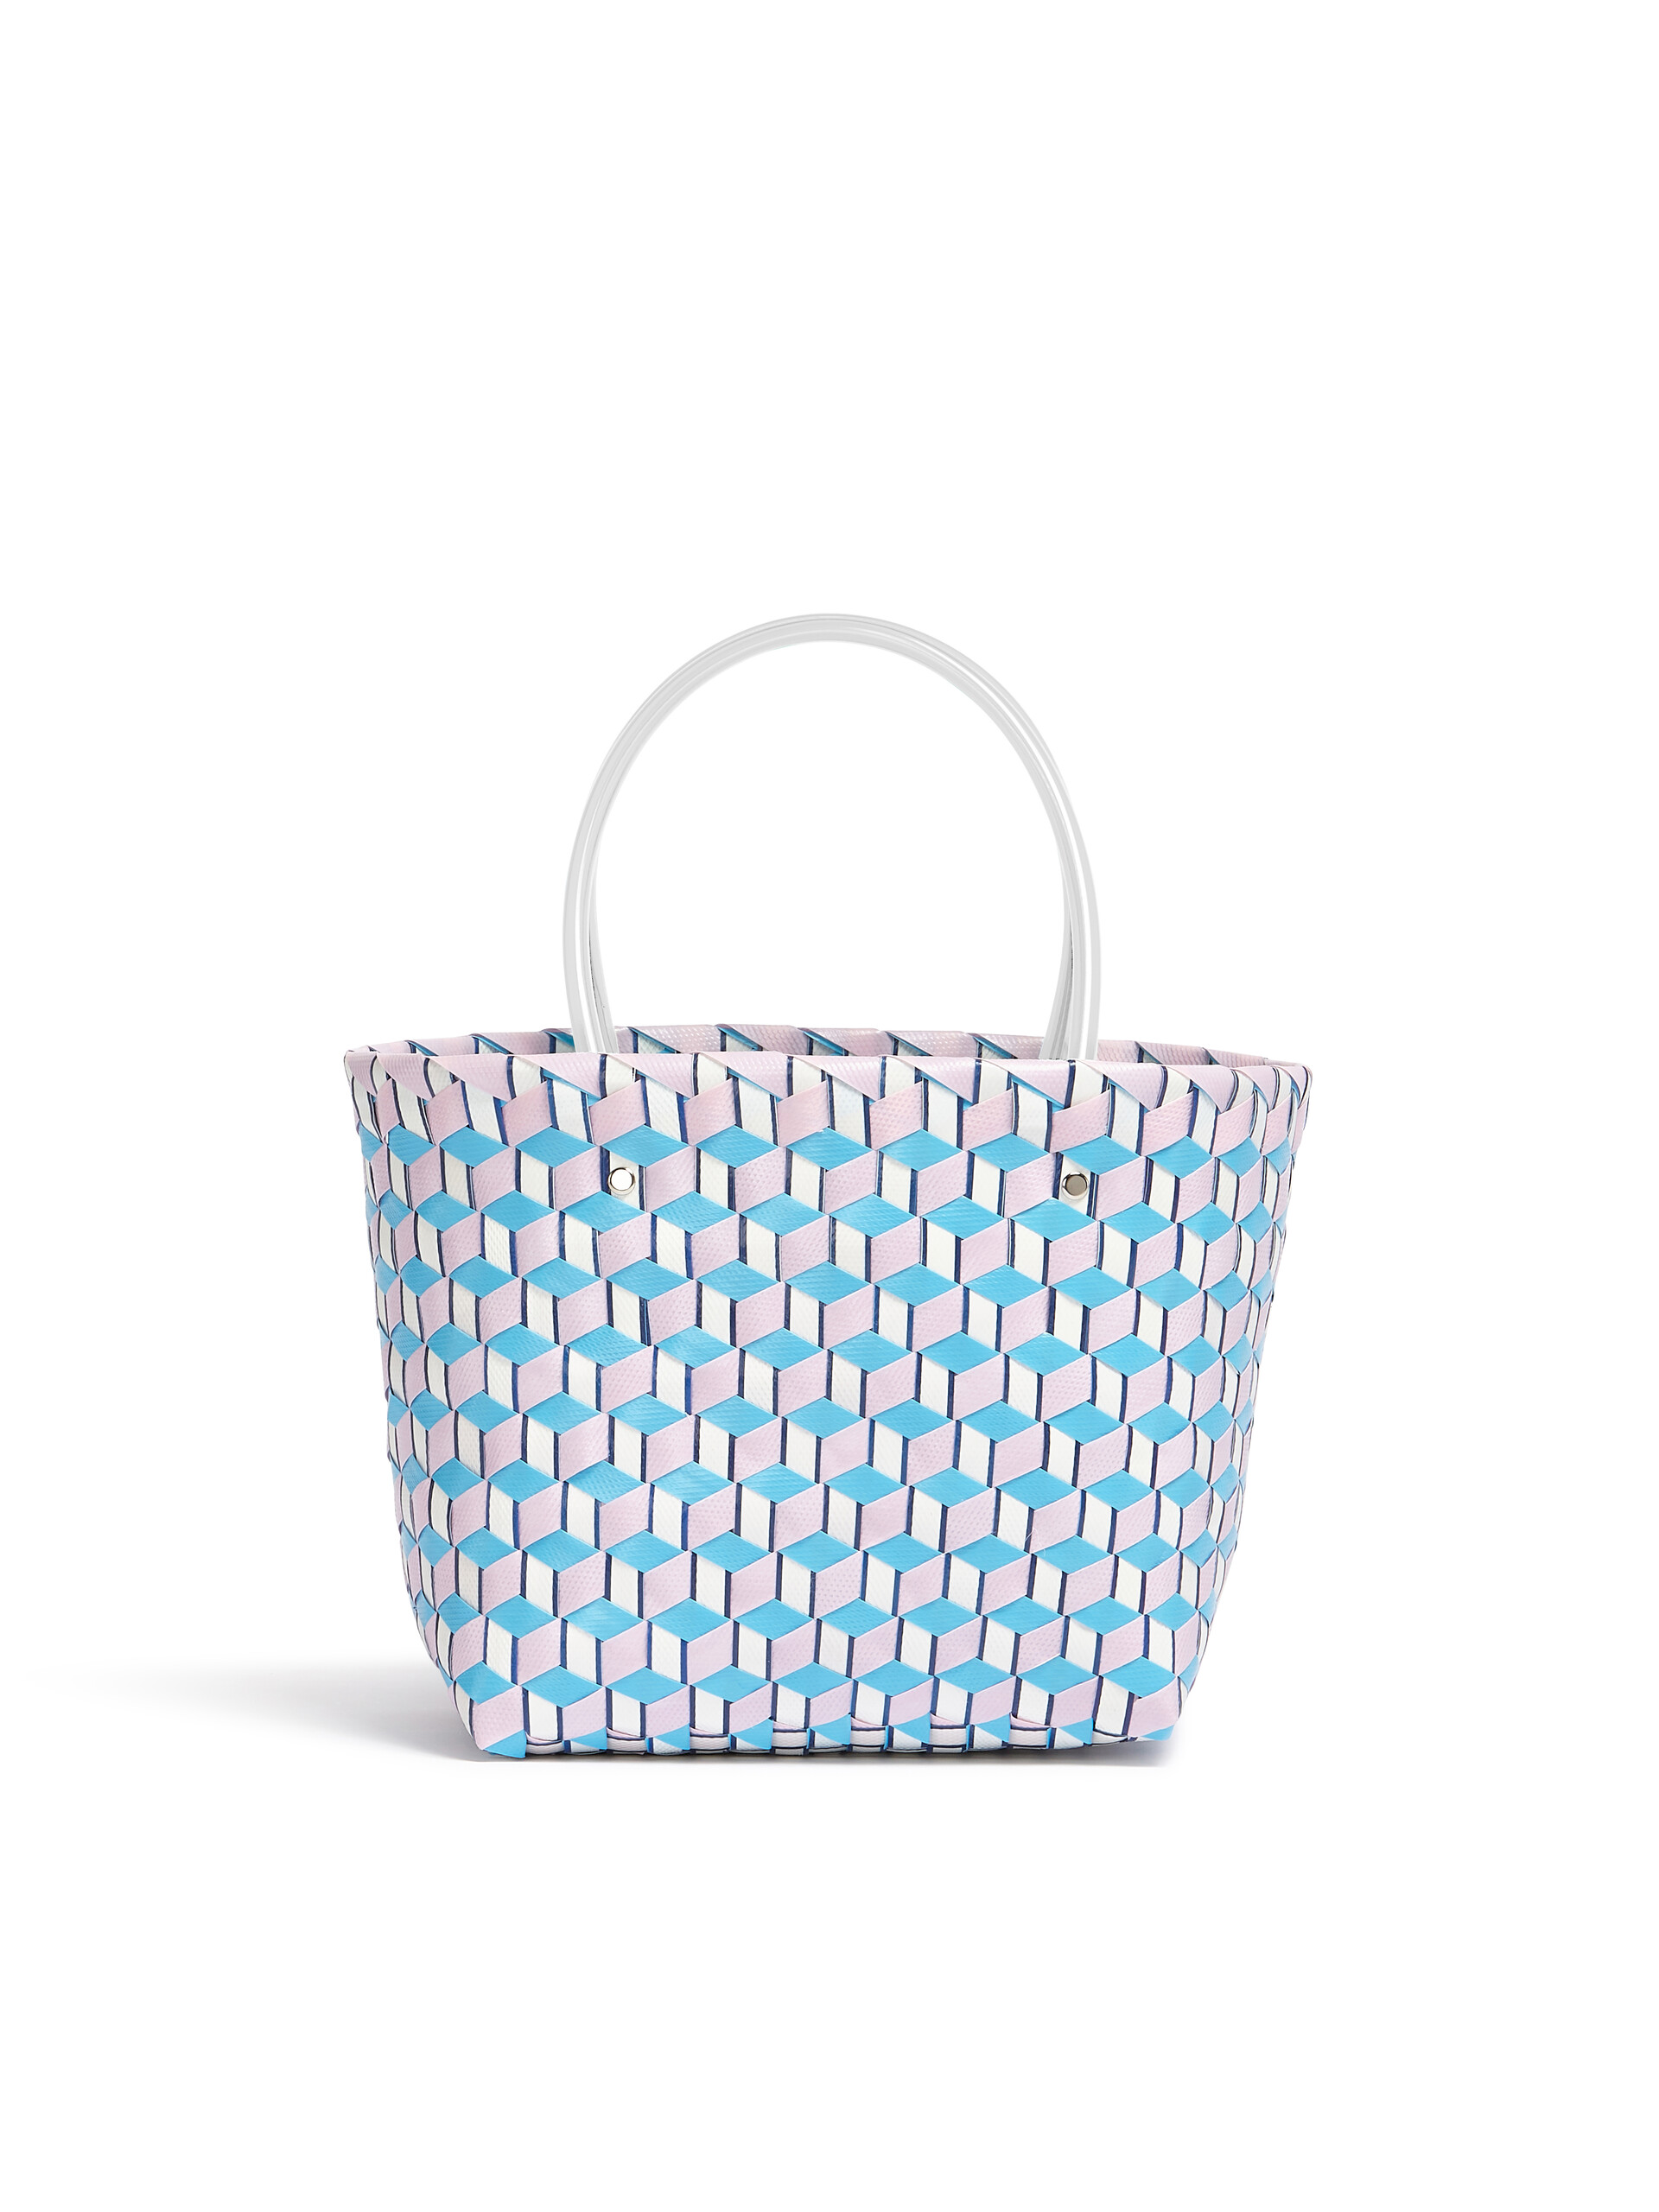 MARNI MARKET 3D BAG in pale blue cube woven material - Shopping Bags - Image 3